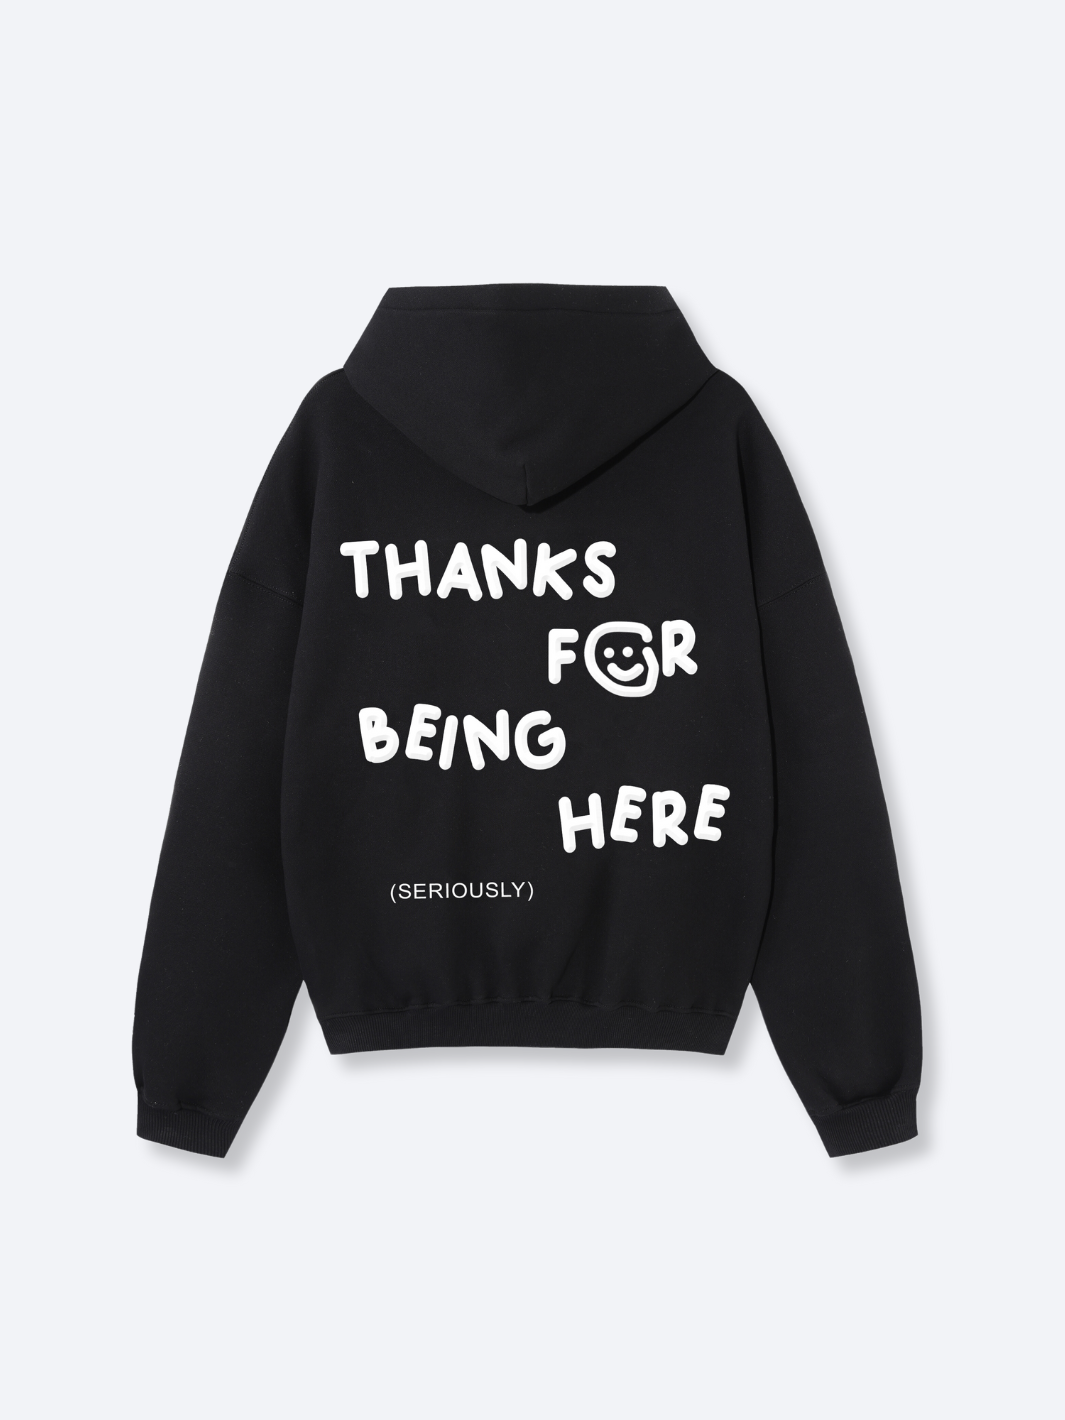 Aesthetic Your Custom Text Here Hoodies, Positive Quote Hoodie For